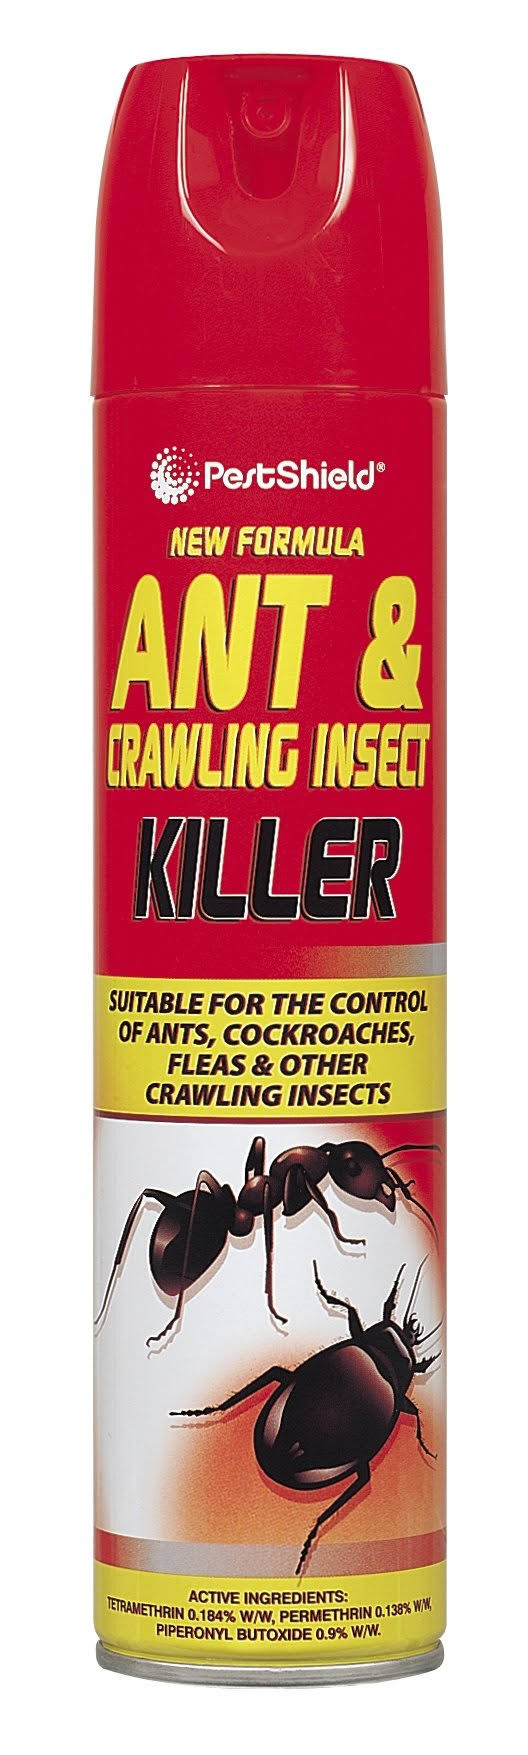 Pestshield Ant Crawling Insect Killer Spray